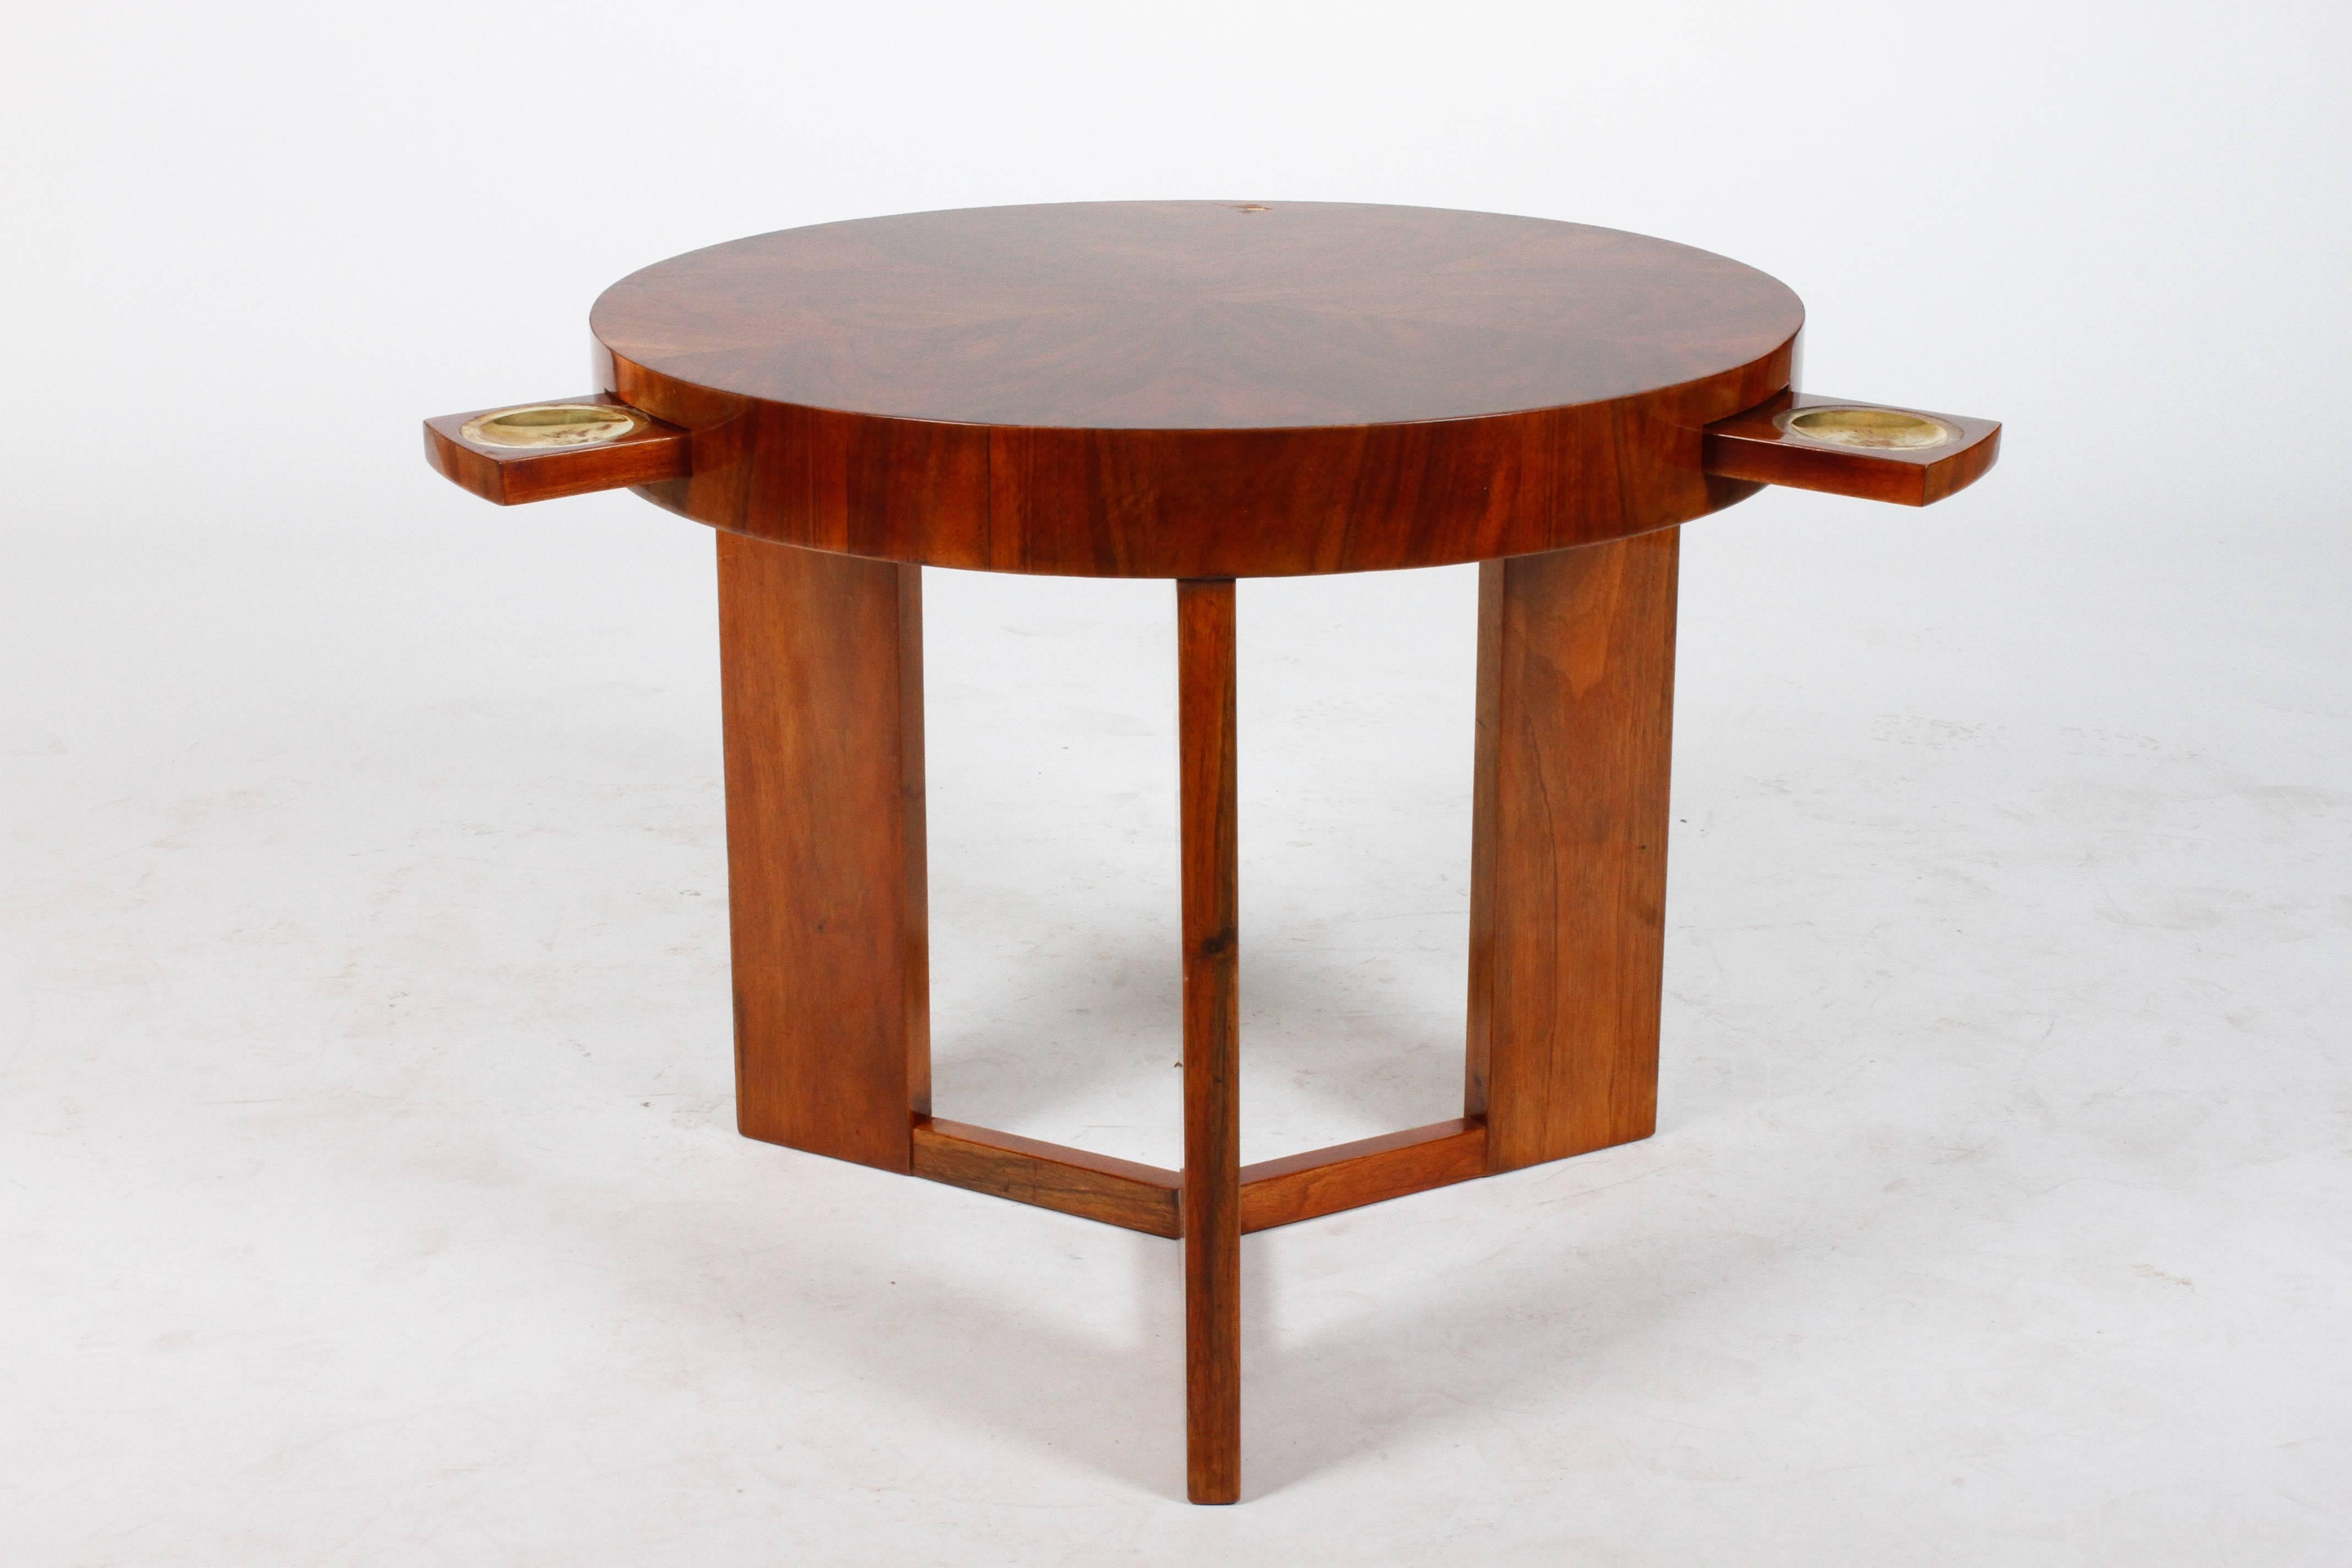 This Art Deco game table is from Hungary, circa 1930. It is made from walnut veneer and has three extendable ashtrays.